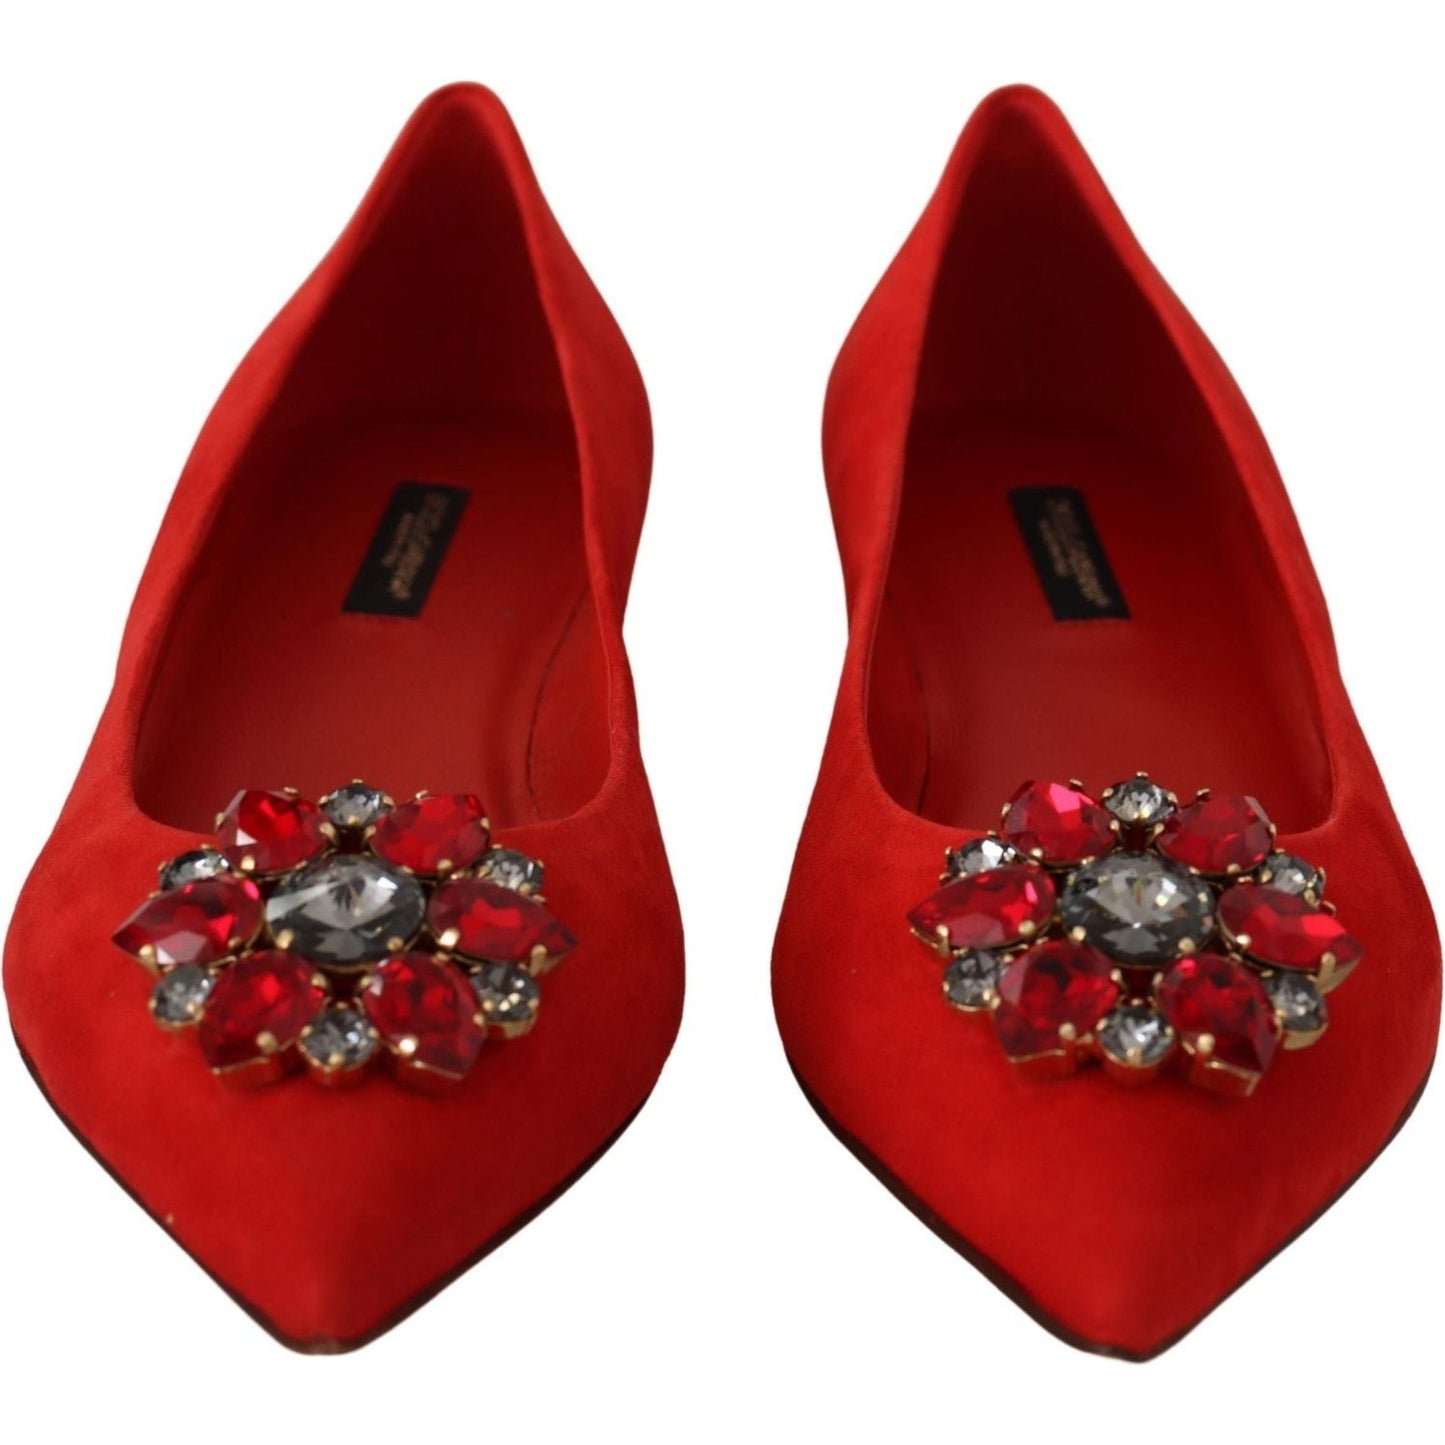 Dolce & Gabbana Crystal Embellished Red Suede Flats red-suede-crystals-loafers-flats-shoes-1 IMG_5646-c441f198-538.jpg